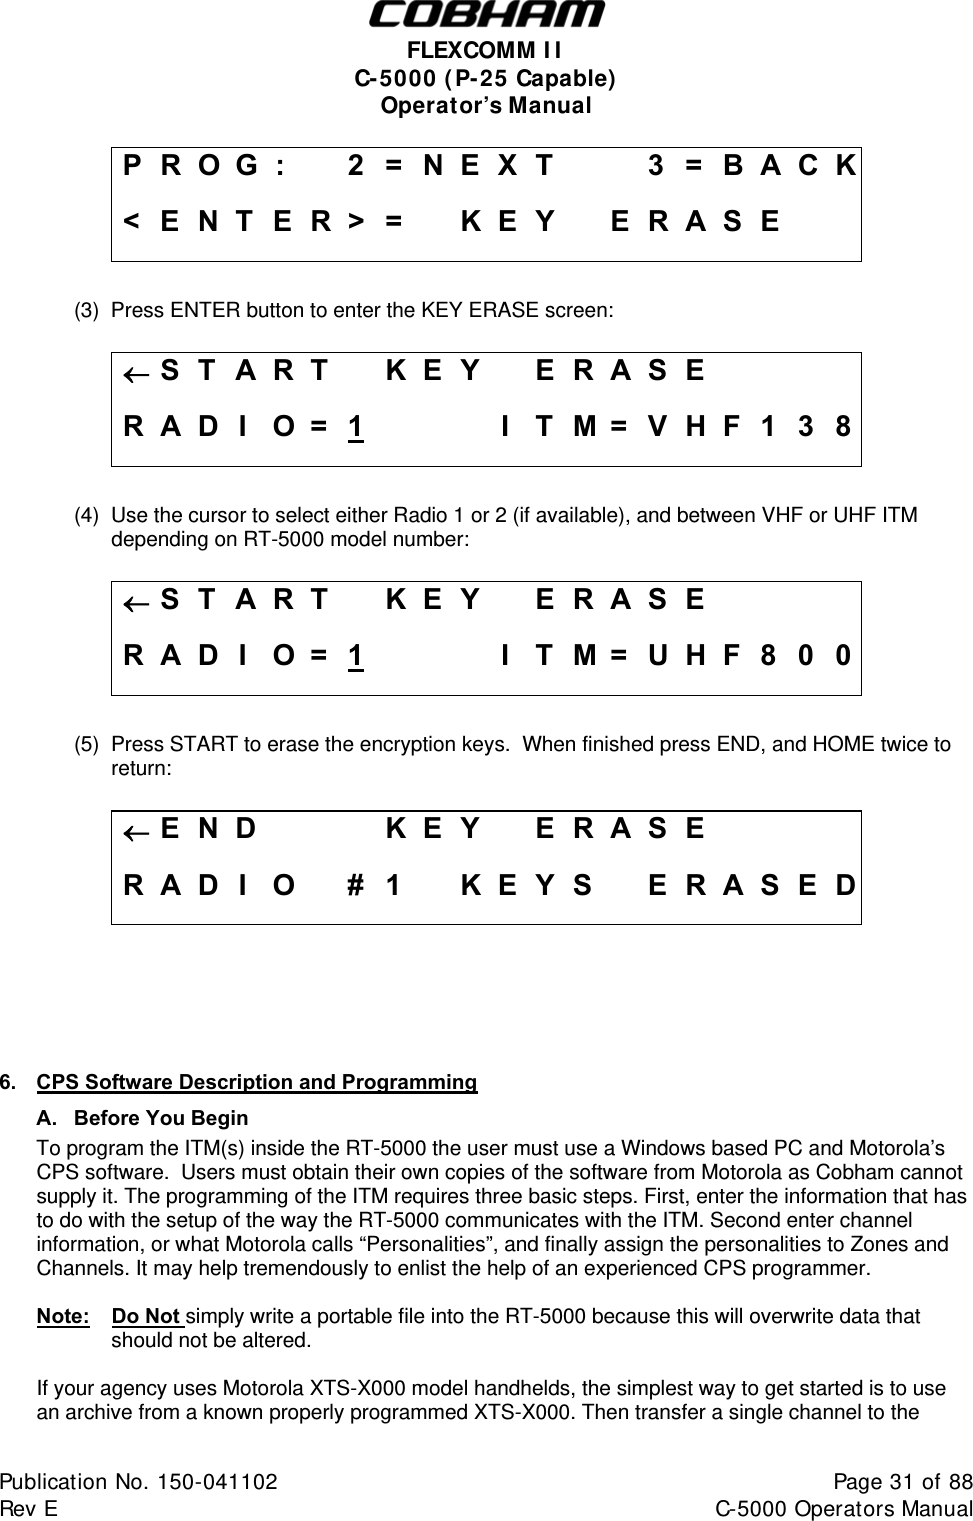  FLEXCOMM I I  C-5000 ( P-25 Capable)  Operator’s Manual P R O G :    2 = N E X T     3 = B A C K &lt; E N T E R &gt; =   K E Y   E R A S E      (3)  Press ENTER button to enter the KEY ERASE screen:  S T A R T  KEY  ERASE     R A D I  O =  1    I T M = V H F 1 3 8  (4)  Use the cursor to select either Radio 1 or 2 (if available), and between VHF or UHF ITM depending on RT-5000 model number:   S T A R T  KEY  ERASE     R A D I  O =  1    I T M = U H F 8 0 0  (5)  Press START to erase the encryption keys.  When finished press END, and HOME twice to return:  E N D    KEY  ERASE     R A D I O  # 1  K E Y S  E R A S E D      6.  CPS Software Description and Programming A. Before You Begin To program the ITM(s) inside the RT-5000 the user must use a Windows based PC and Motorola’s CPS software.  Users must obtain their own copies of the software from Motorola as Cobham cannot supply it. The programming of the ITM requires three basic steps. First, enter the information that has to do with the setup of the way the RT-5000 communicates with the ITM. Second enter channel information, or what Motorola calls “Personalities”, and finally assign the personalities to Zones and Channels. It may help tremendously to enlist the help of an experienced CPS programmer.   Note:   Do Not simply write a portable file into the RT-5000 because this will overwrite data that should not be altered.    If your agency uses Motorola XTS-X000 model handhelds, the simplest way to get started is to use   an archive from a known properly programmed XTS-X000. Then transfer a single channel to the Publication No. 150-041102  Page 31 of 88  Rev E  C-5000 Operators Manual    